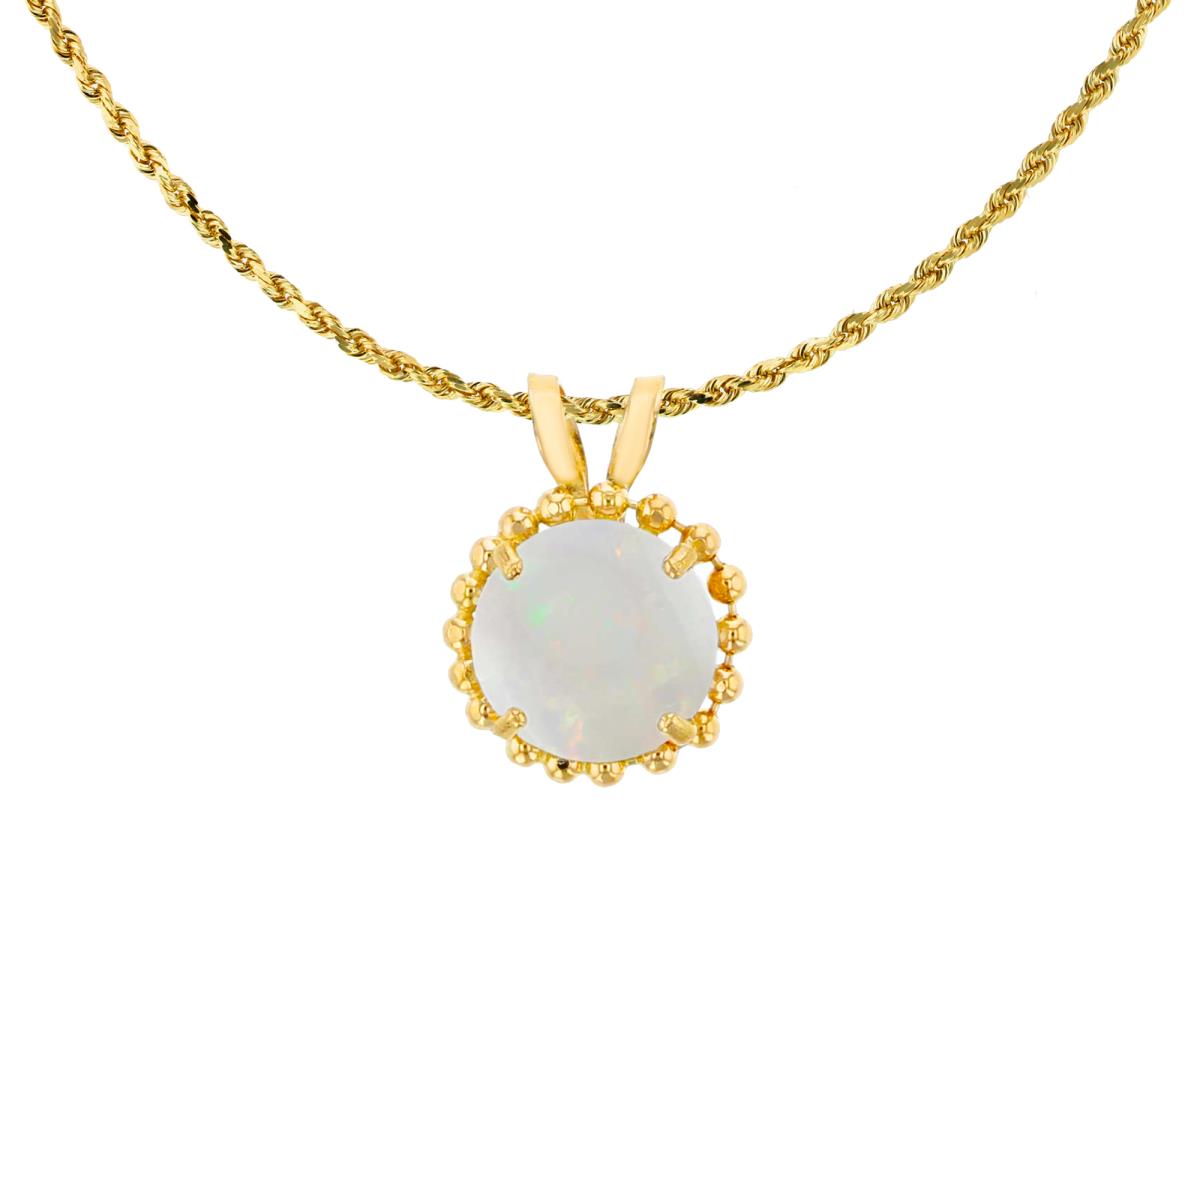 10K Yellow Gold 6mm Rd Cut Opal with Bead Frame Rabbit Ear 18" Necklace